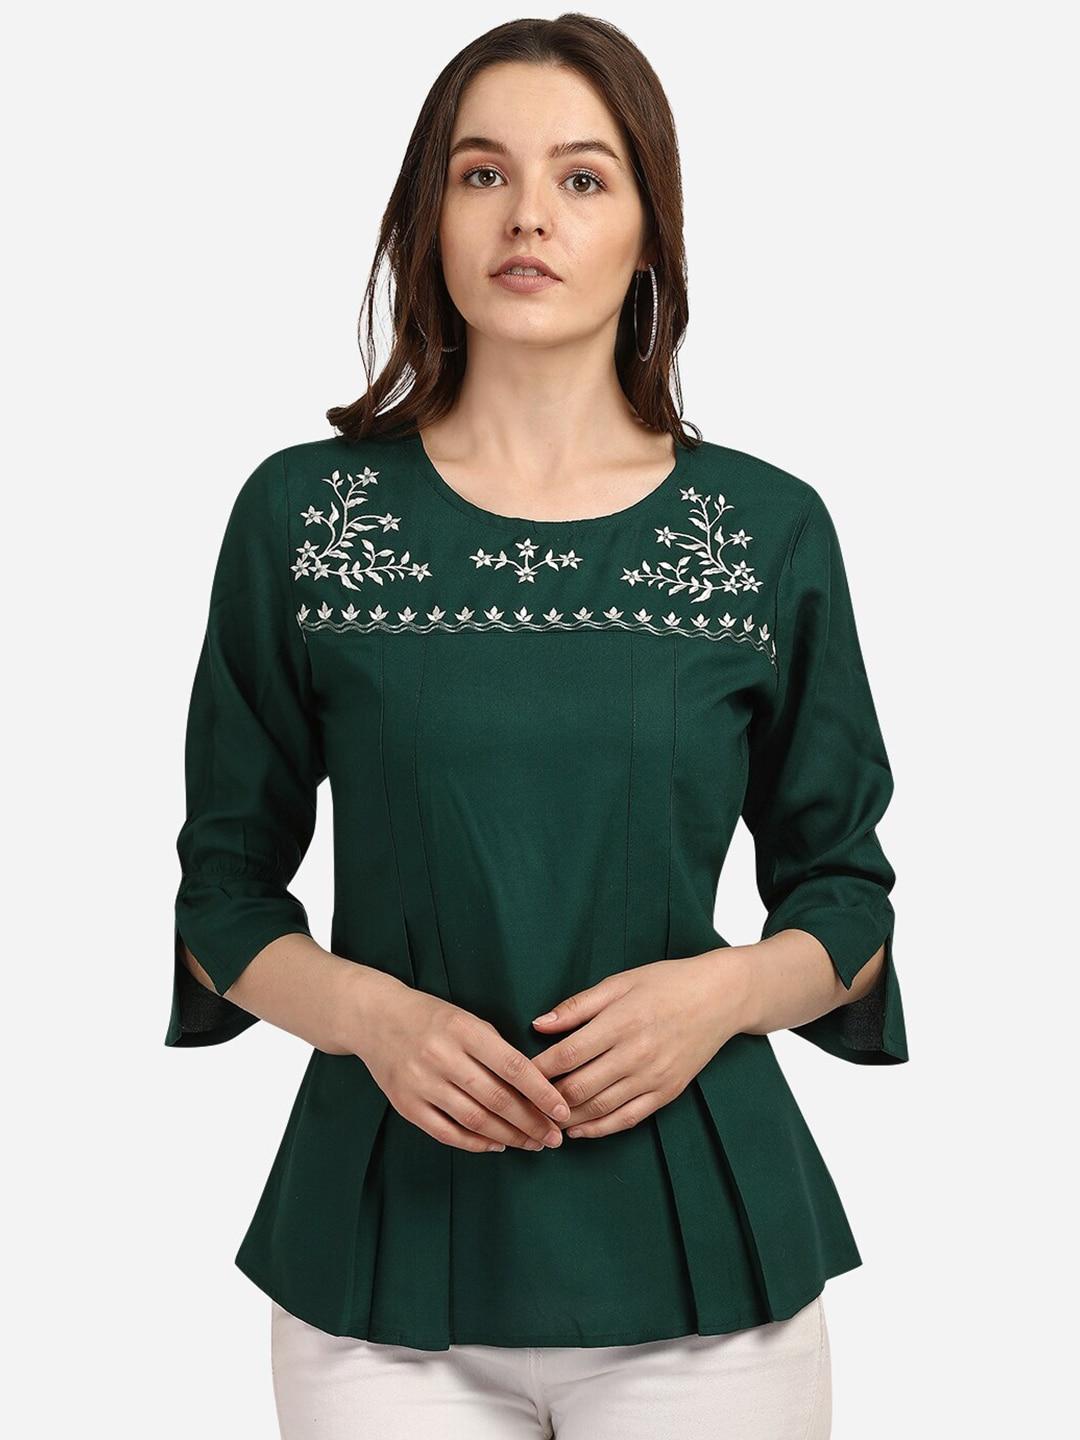 Prettify  Women Green 3/4 Sleeves Embroidered Peplum Top